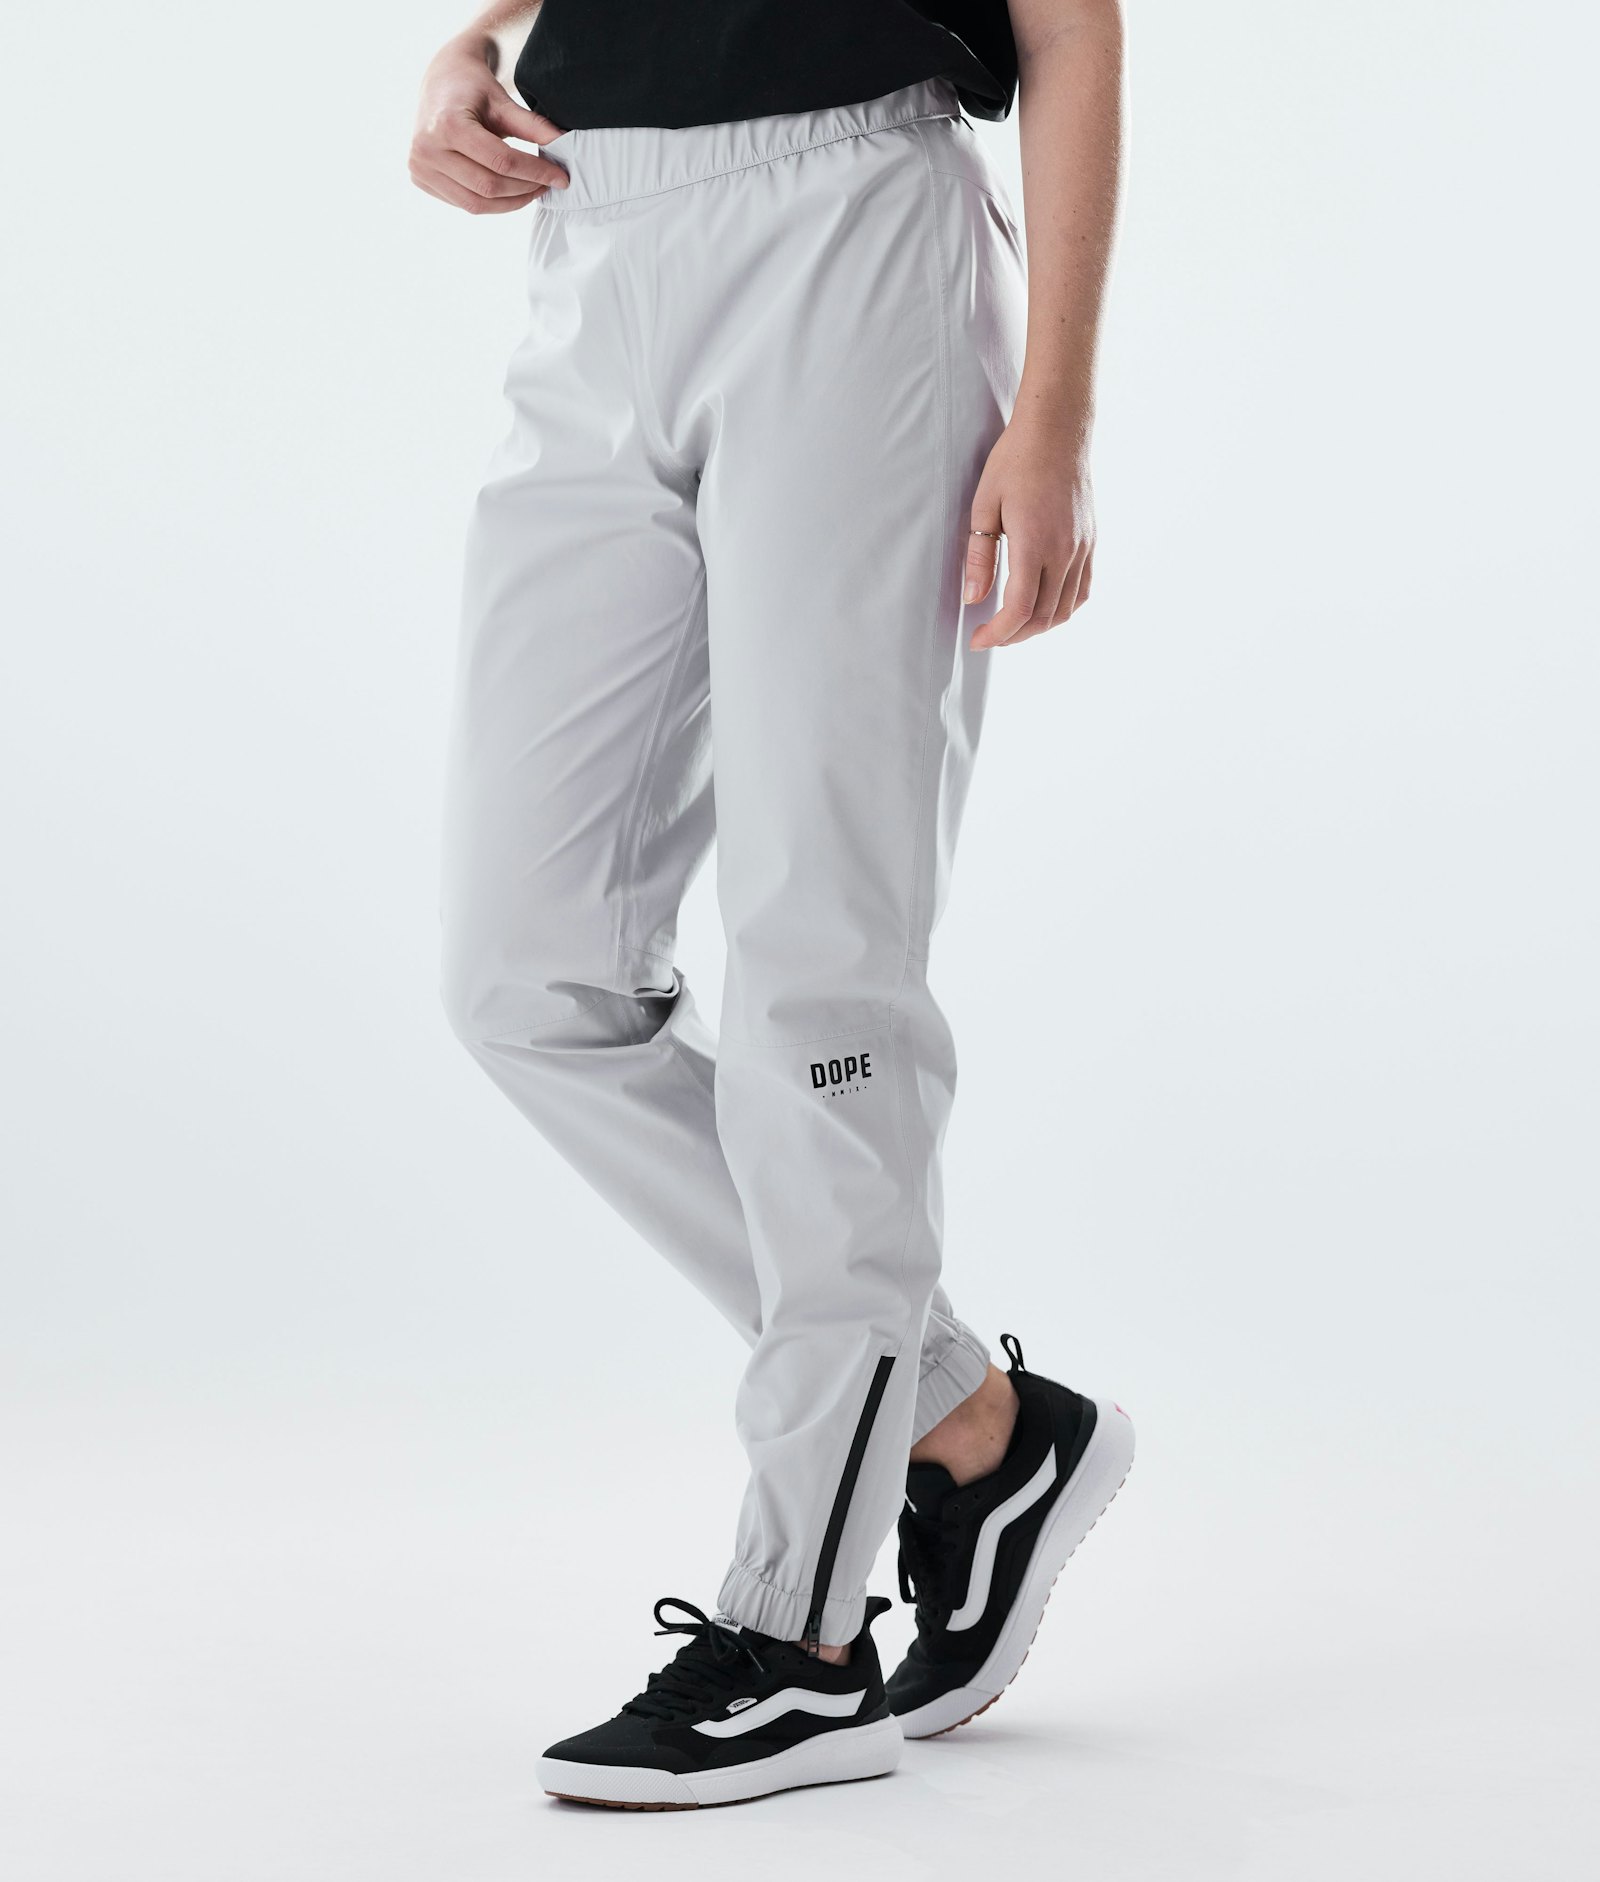 Dope Drizzard W Pantalones Impermeables Mujer Light Grey - Gris